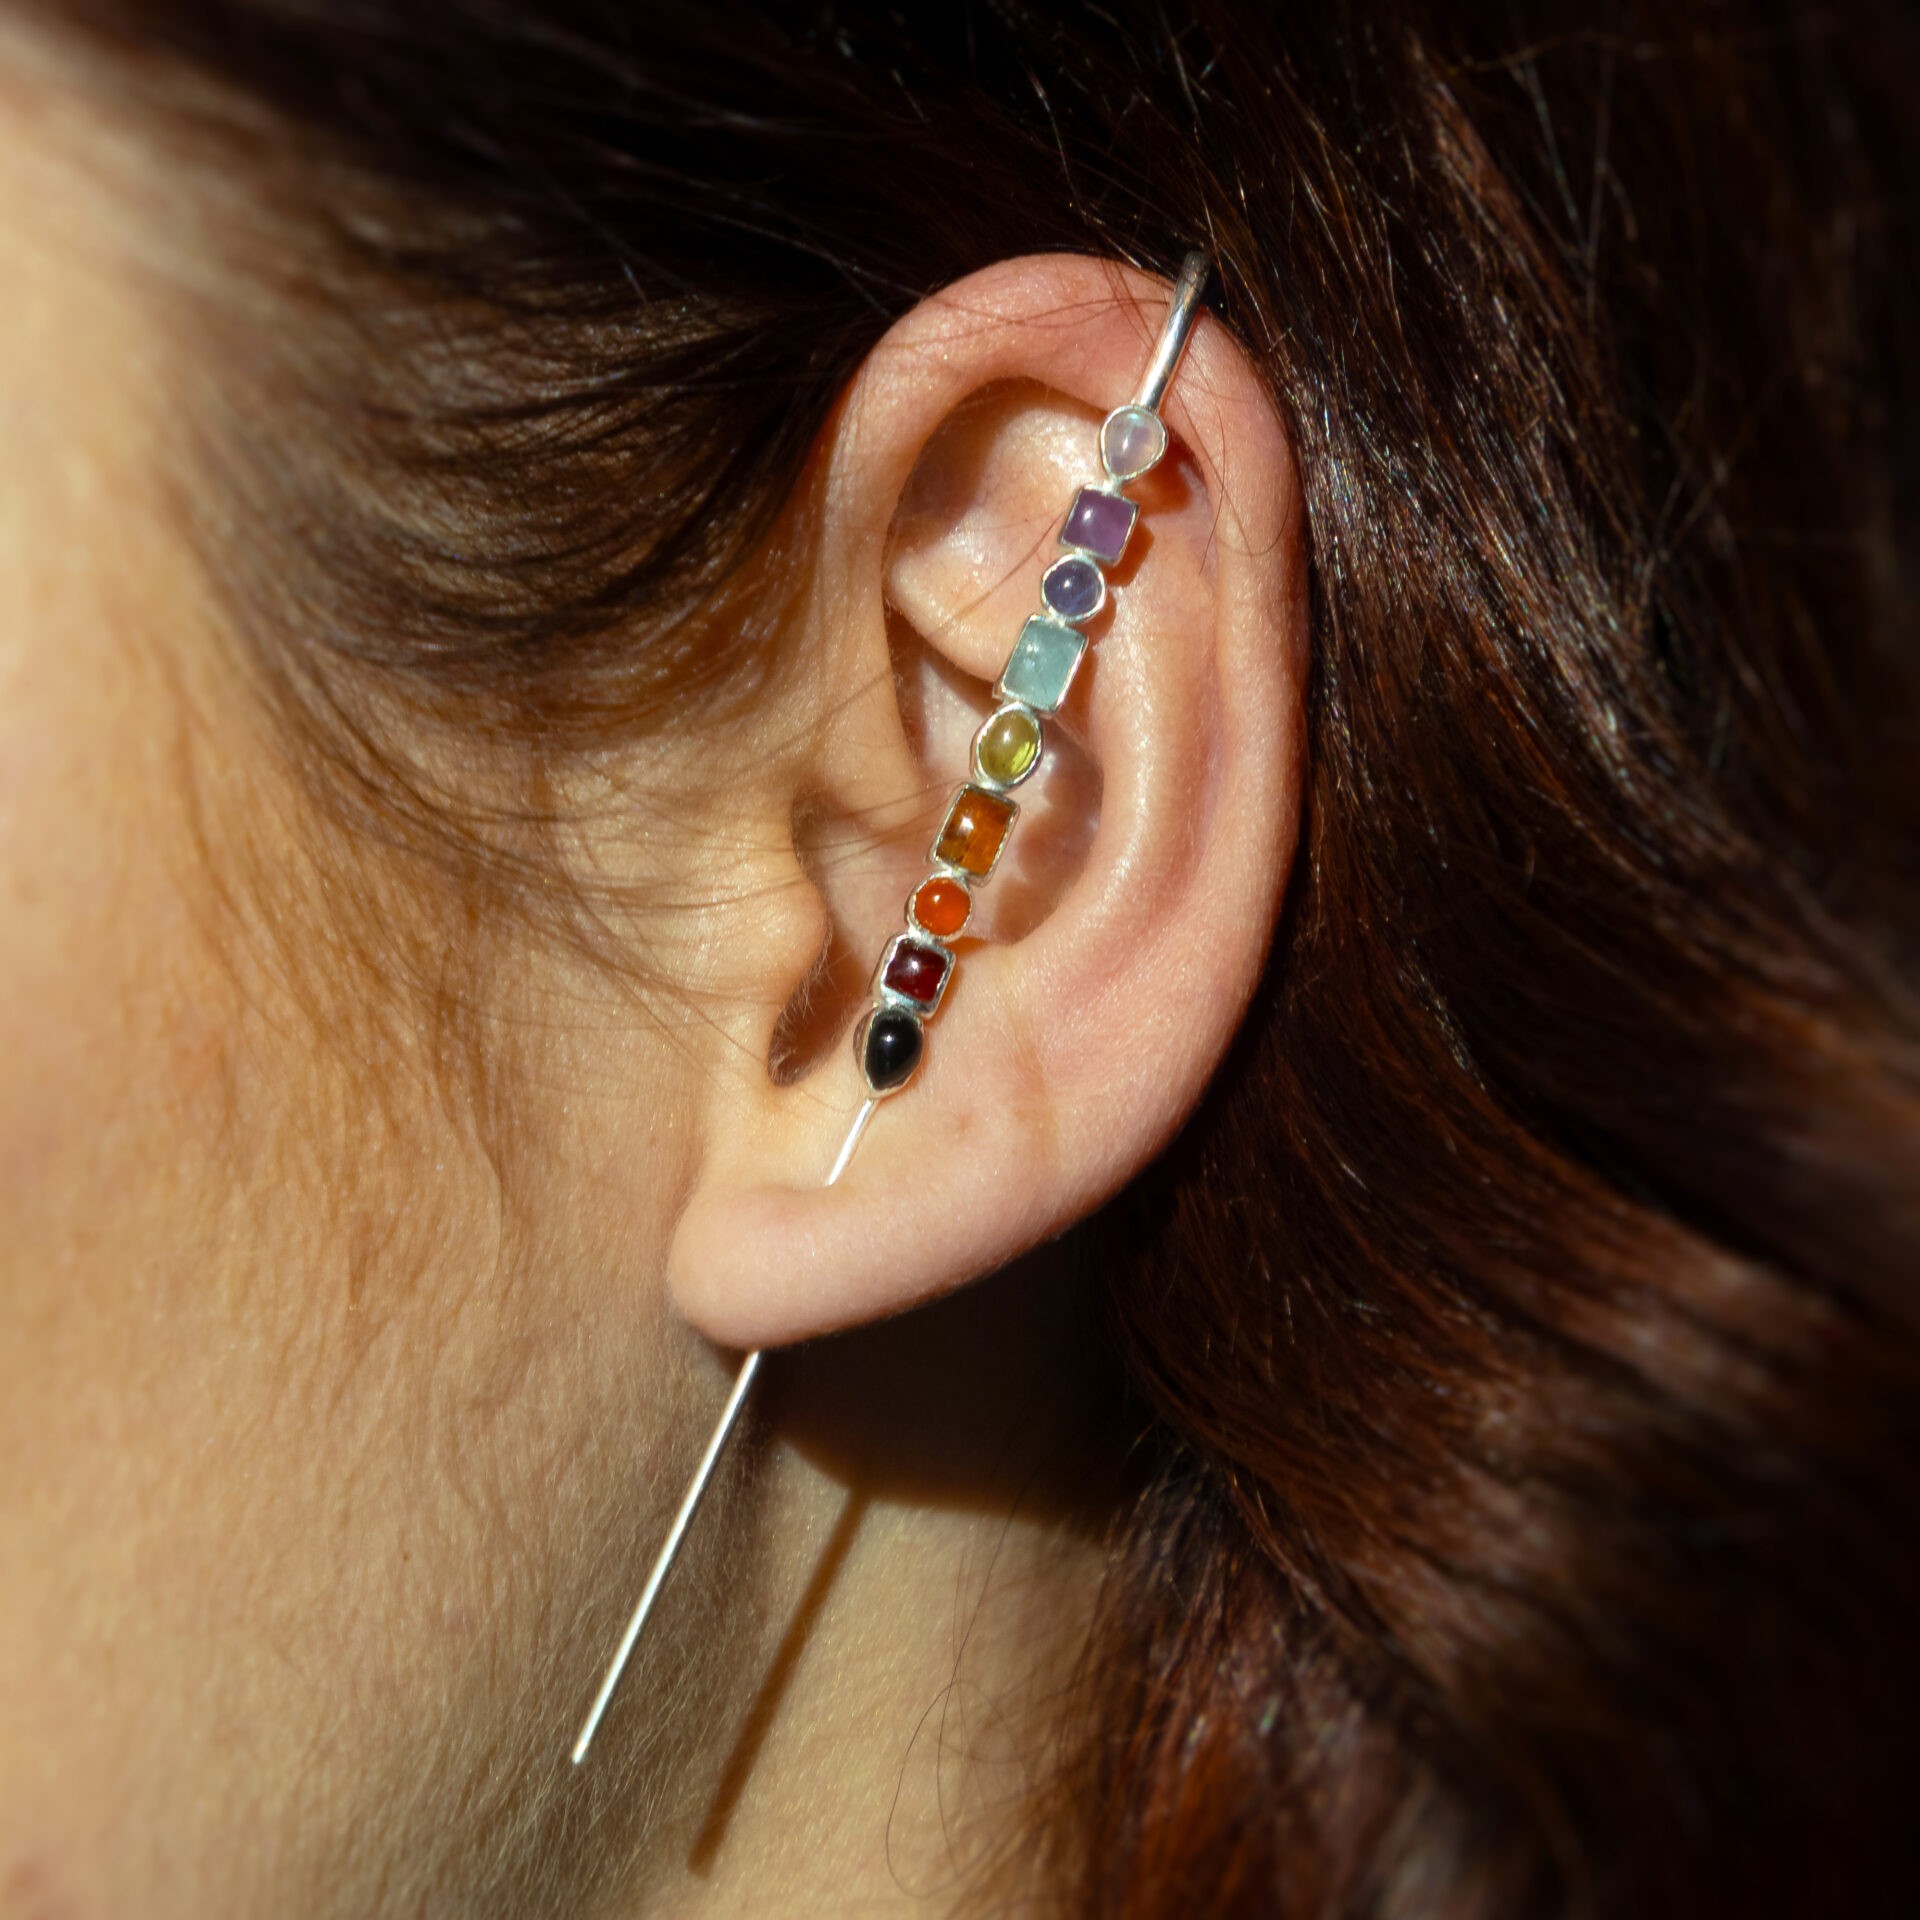 The Art and Expression of Girls Ear Piercings - Sideshow Tattoo And Piercing  San Diego